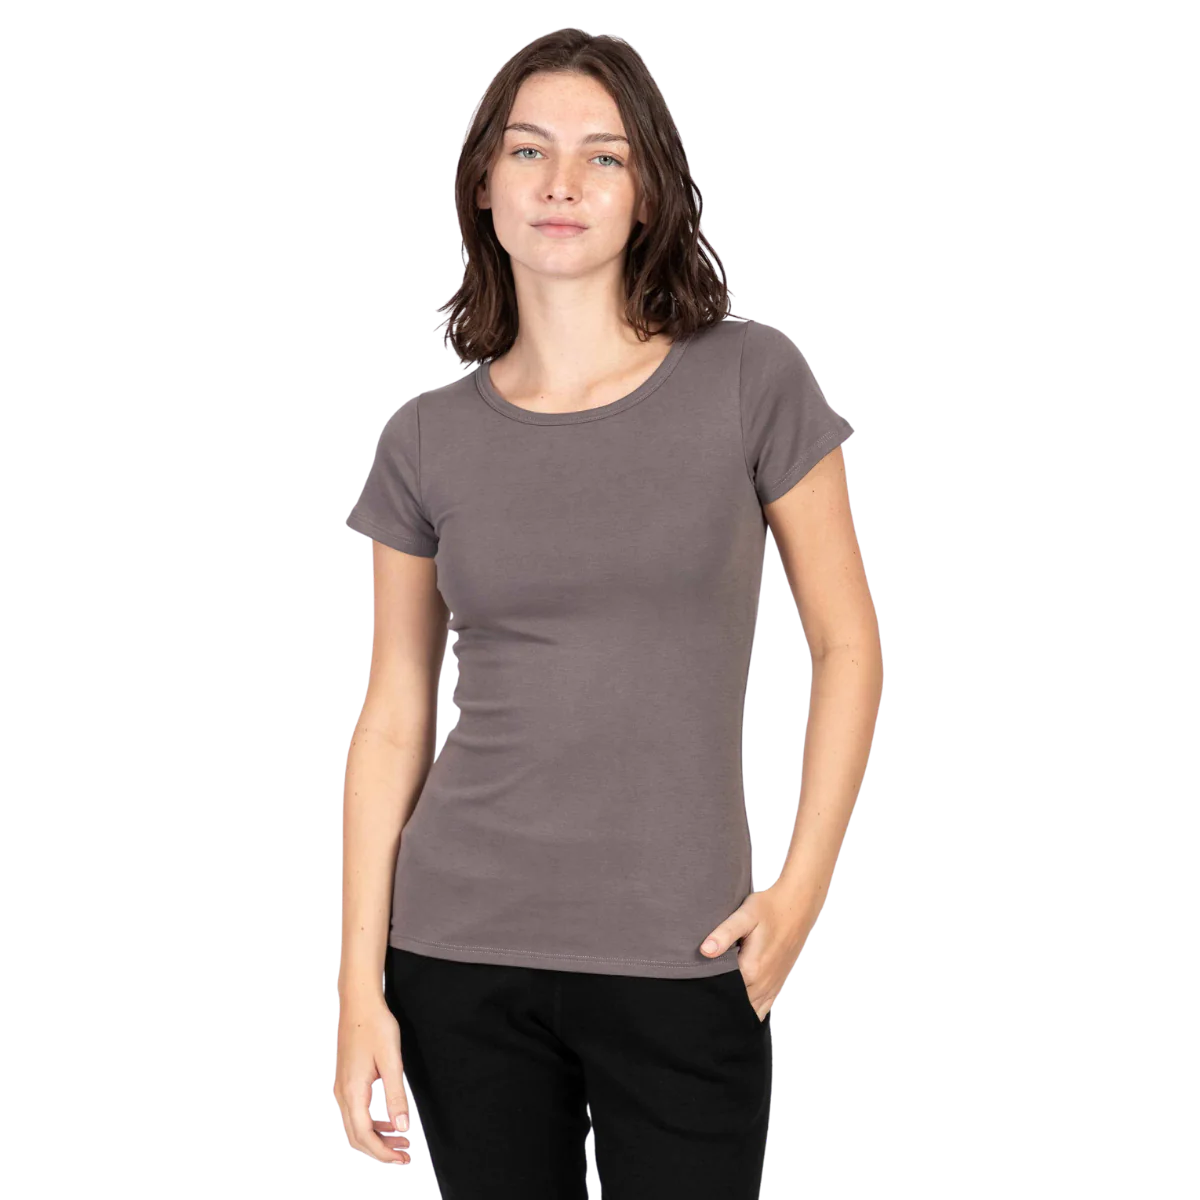 Organic cotton tee for women in natural white color